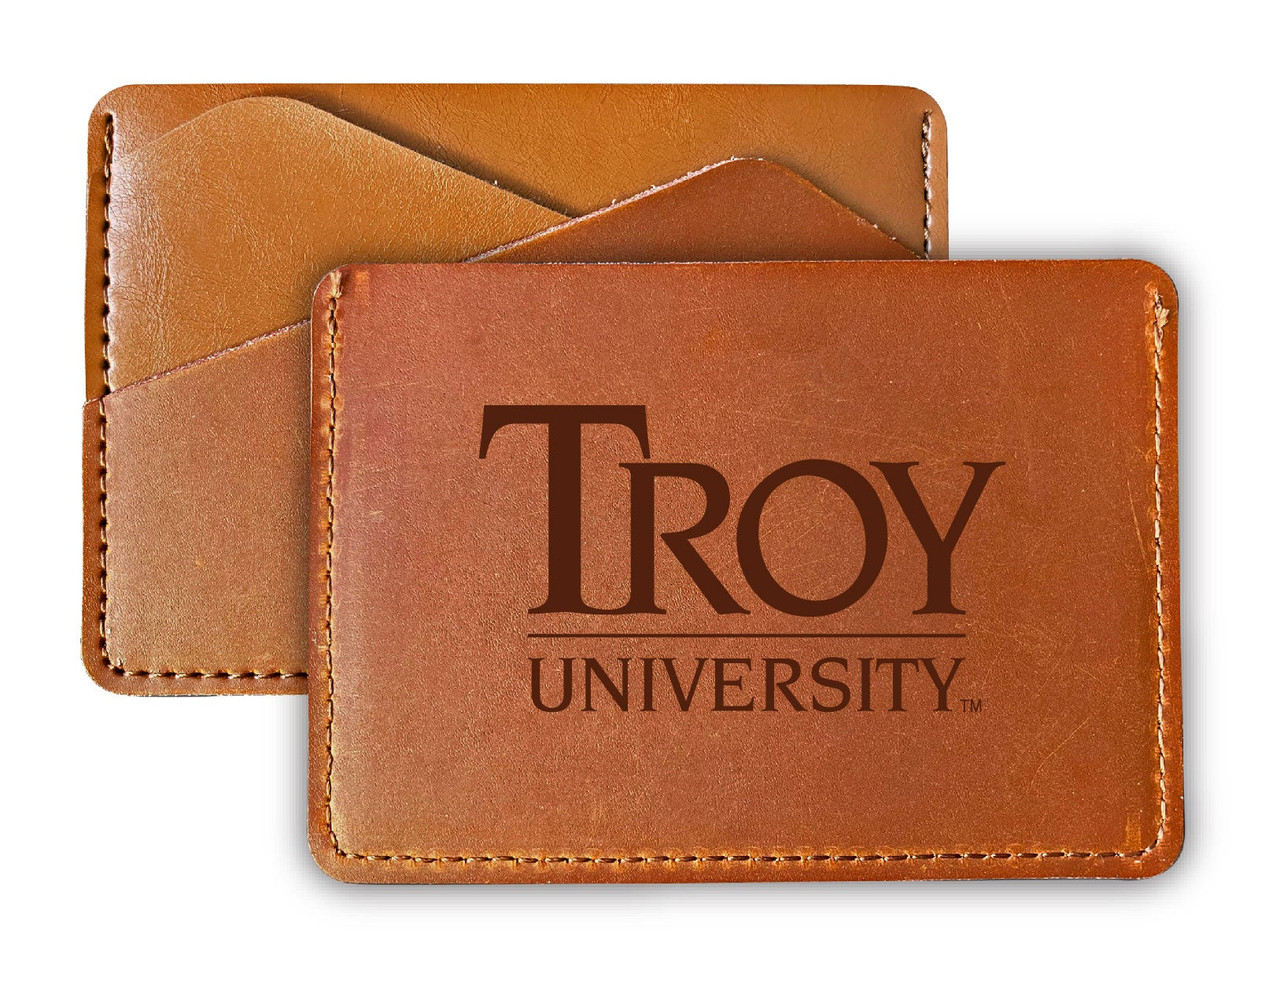 Troy University College Leather Card Holder Wallet